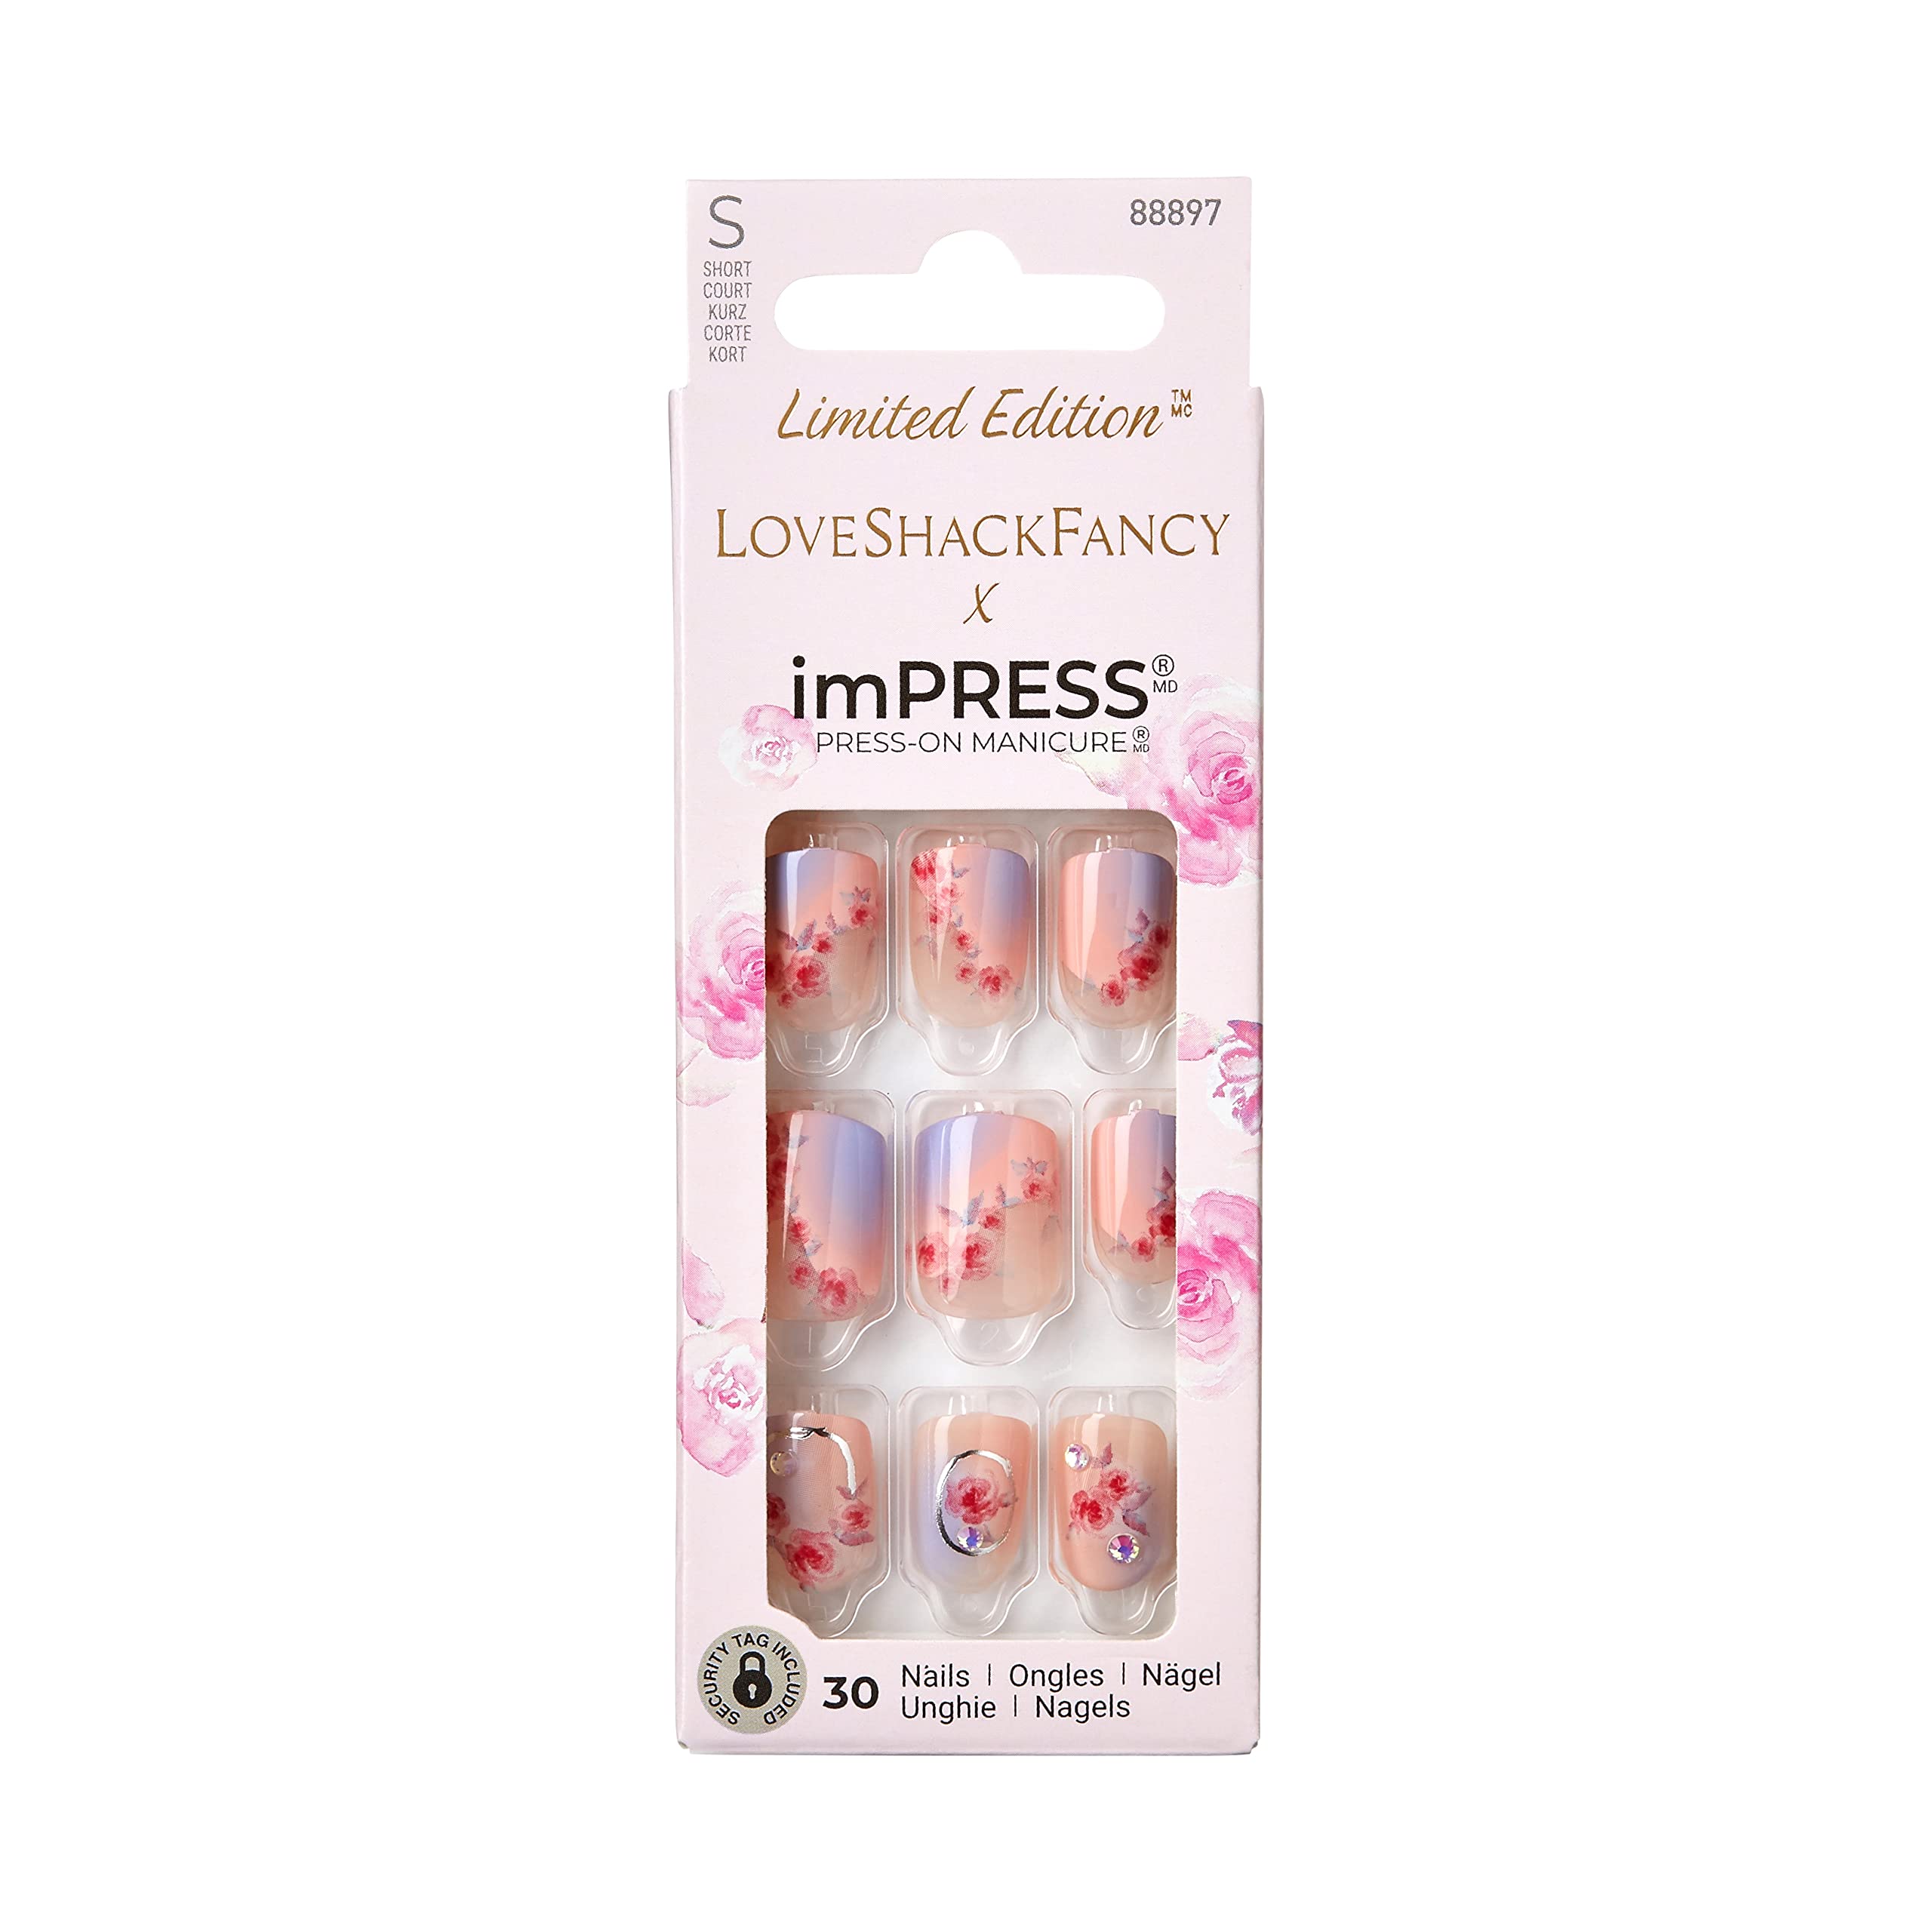 KISS LoveShackFancy x imPRESS Press-On Manicure Limited Edition Style  Sunkissed Peach Short Square Pink Press-On Nails Includes Prep Pad Mini  Nail File Cuticle Stick & 30 Fake Nails